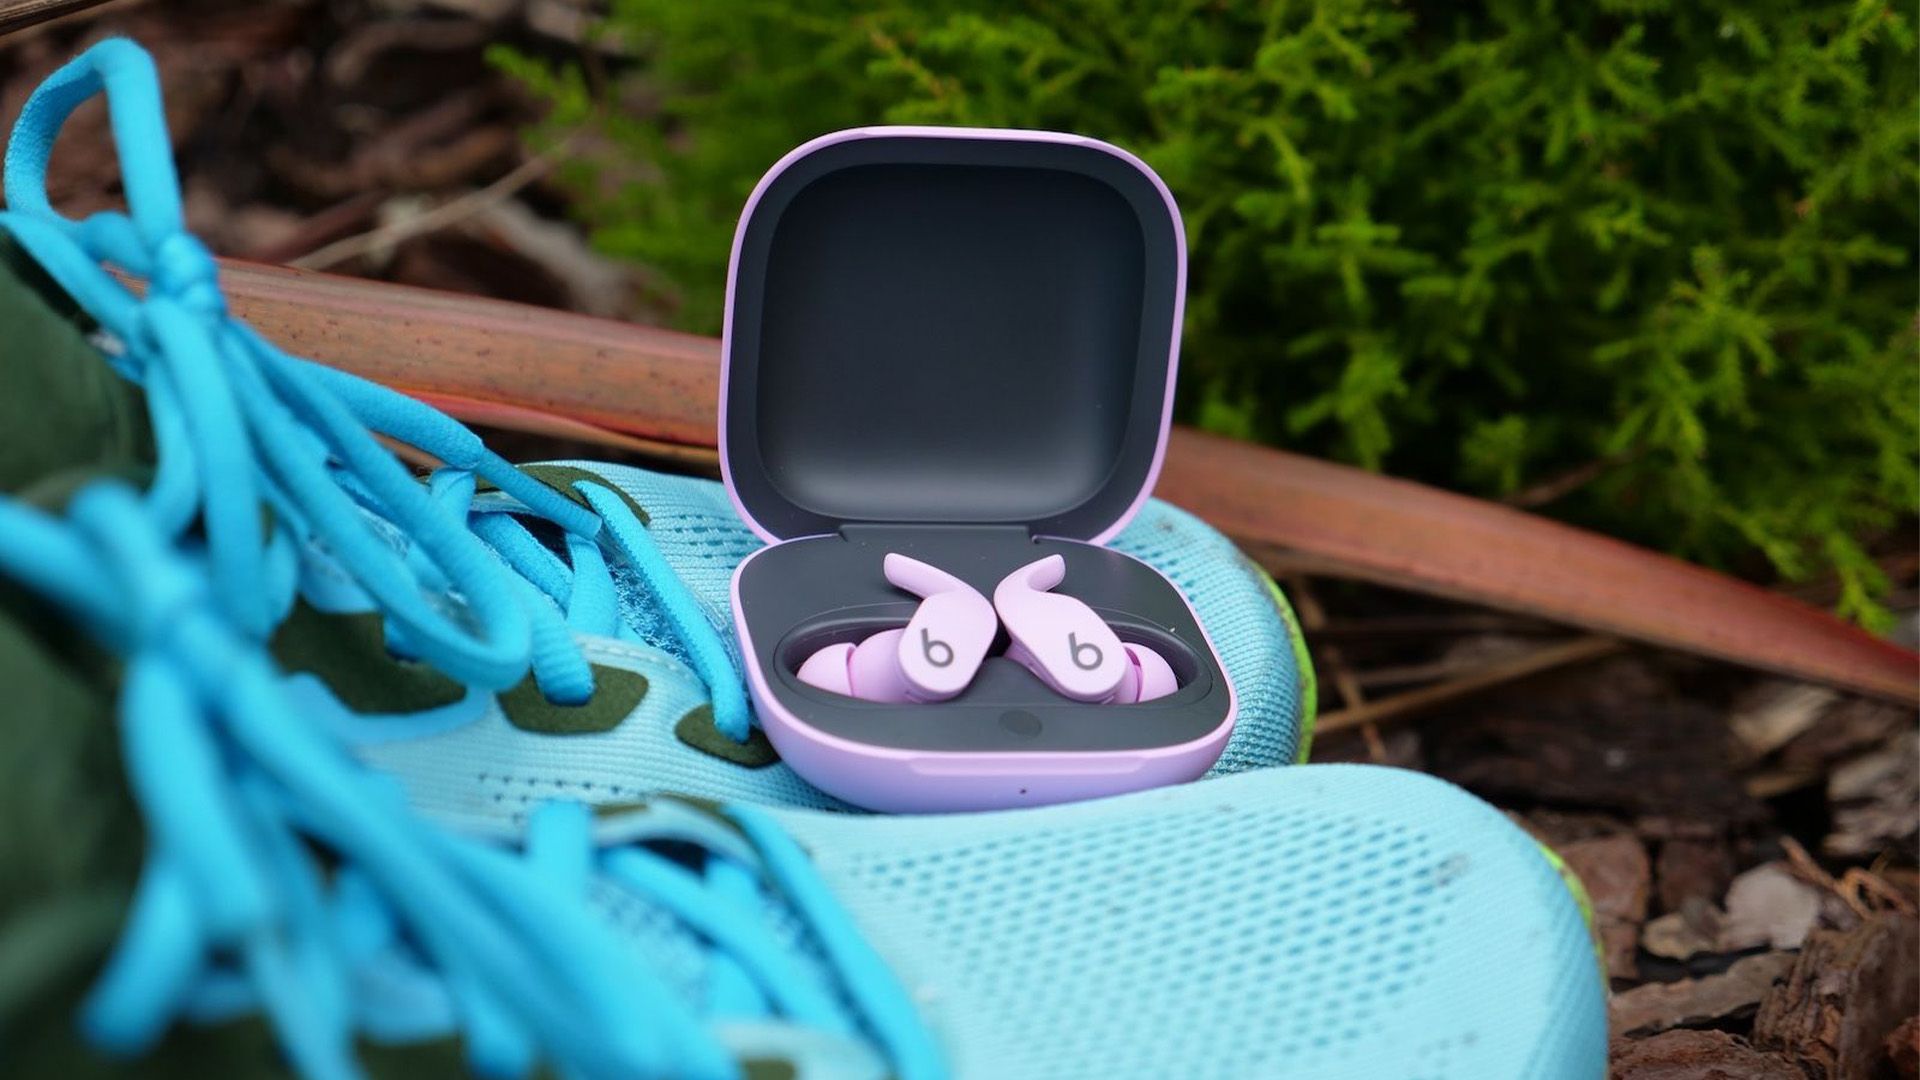 Earbuds in their charging case